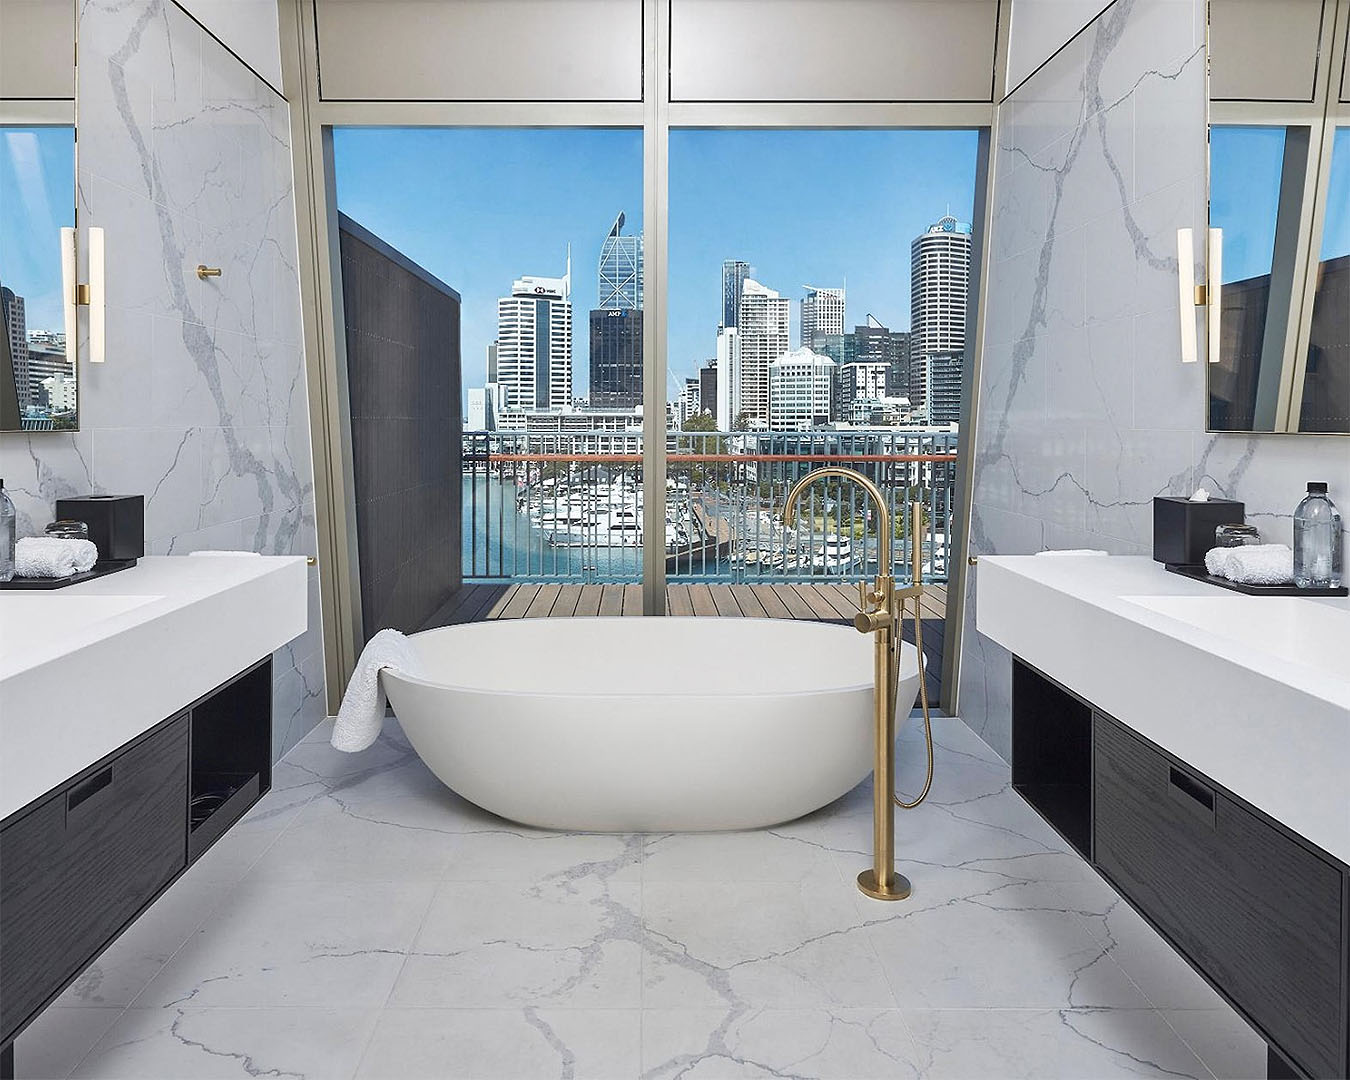 A bath in front of stunning views in a room at The Park Hyatt Auckland.